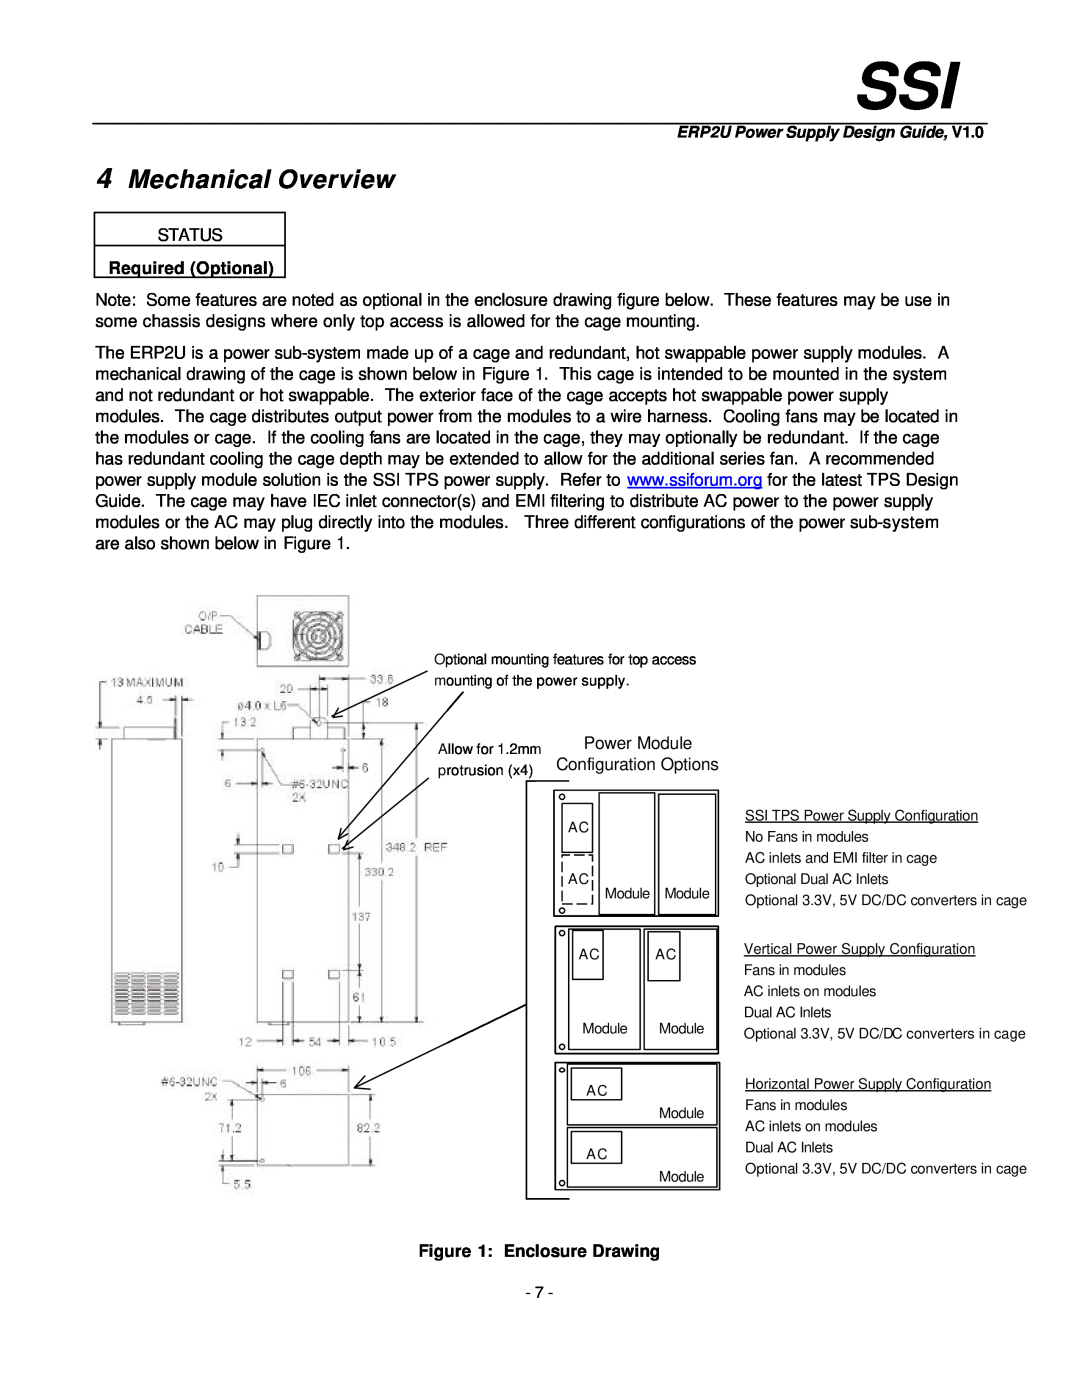 Intel ERP2U manual Mechanical Overview, Required Optional, Enclosure Drawing 